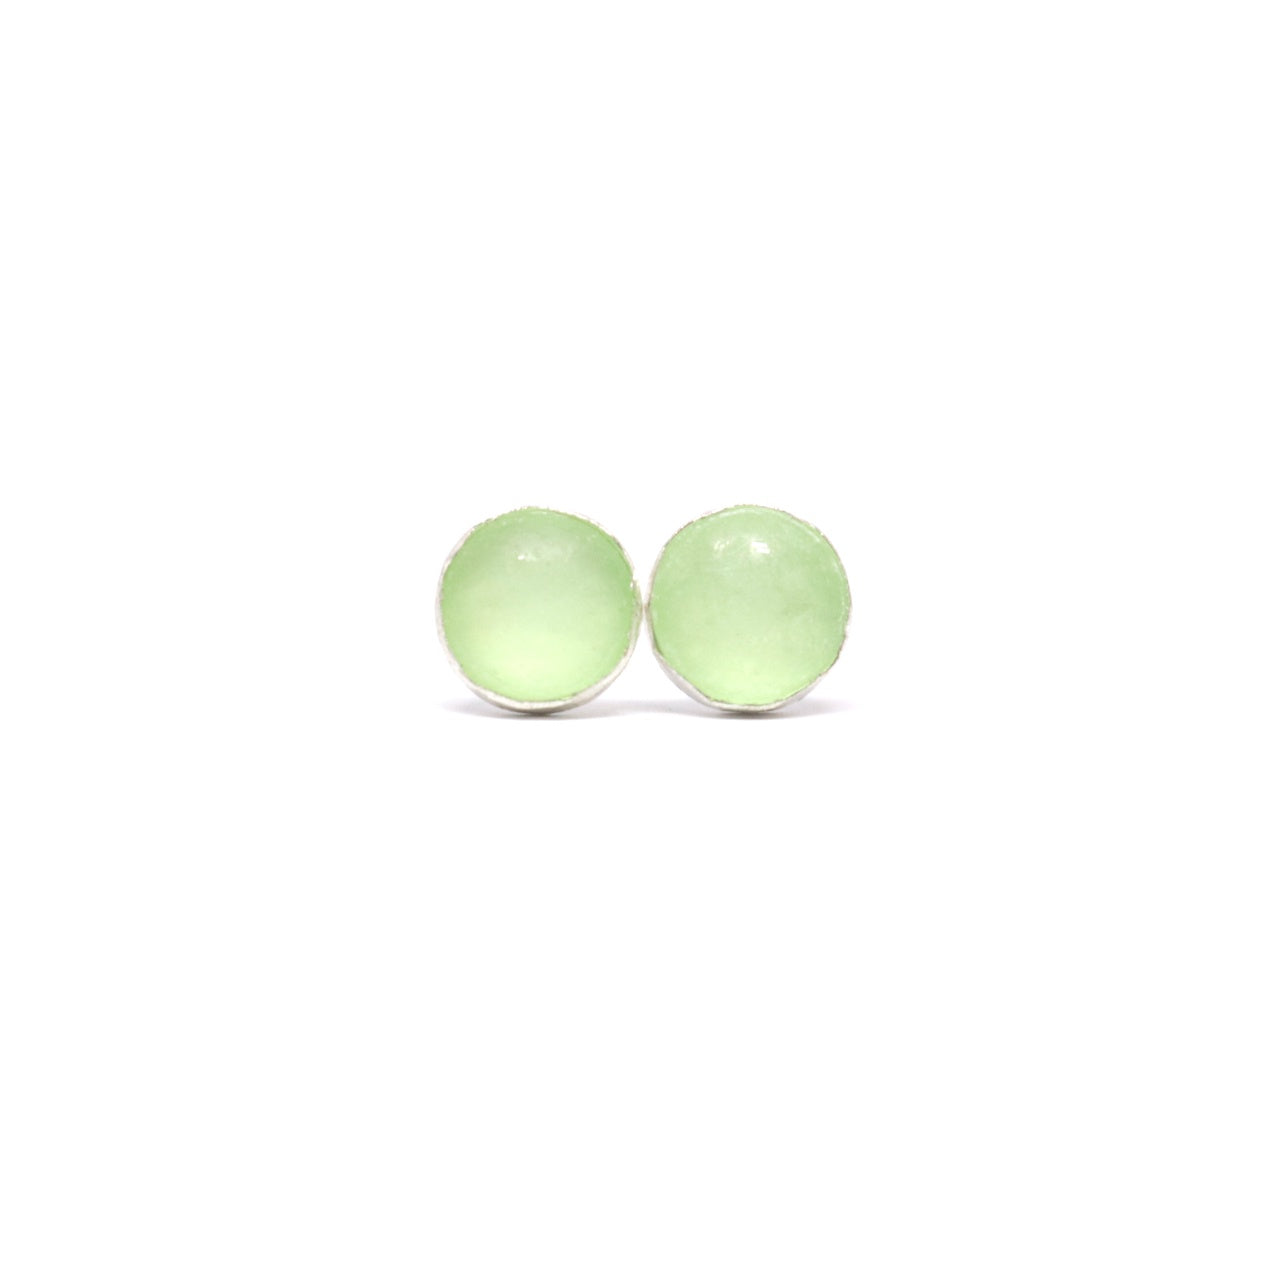 Cheerful Studs. Sterling Silver. Pale Green